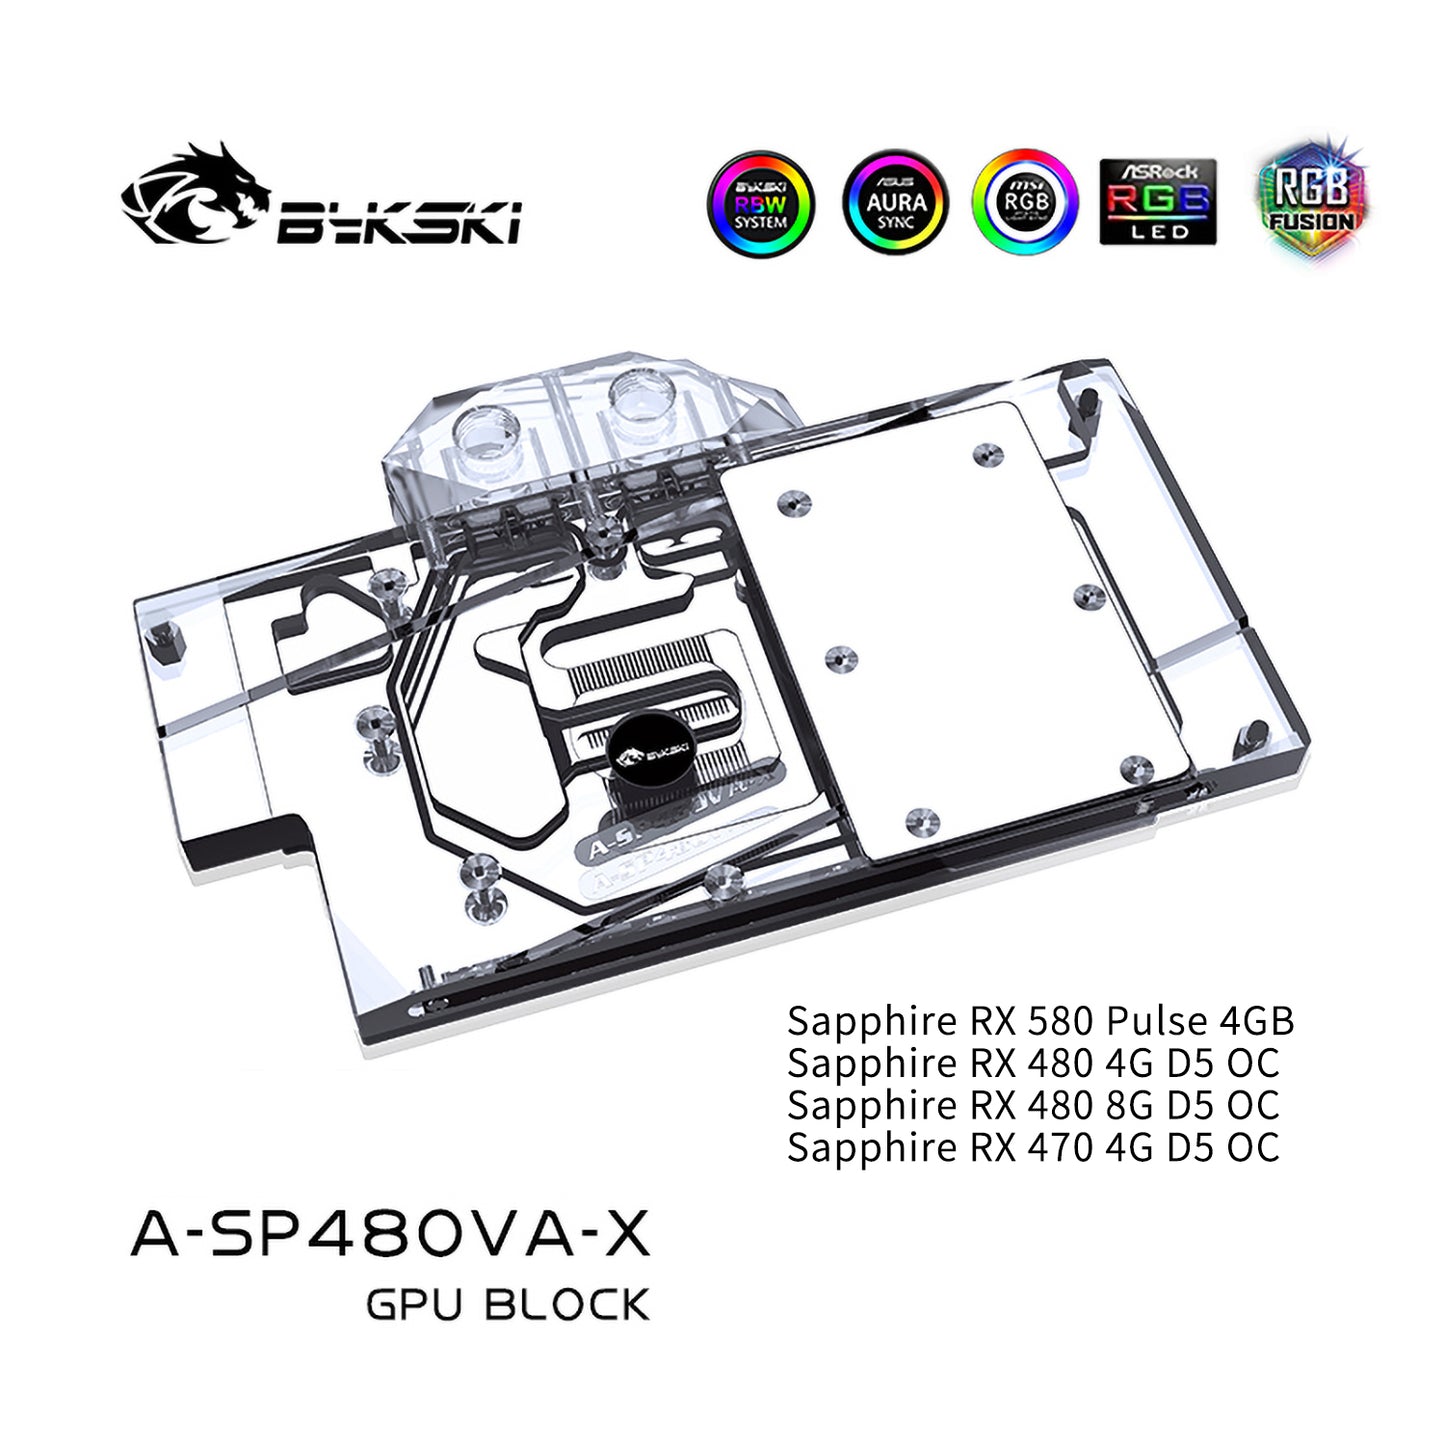 Bykski Full Cover Graphics Card Water Cooling Block Sapphire RX 580 pulse 480/470, A-SP48OVA-X